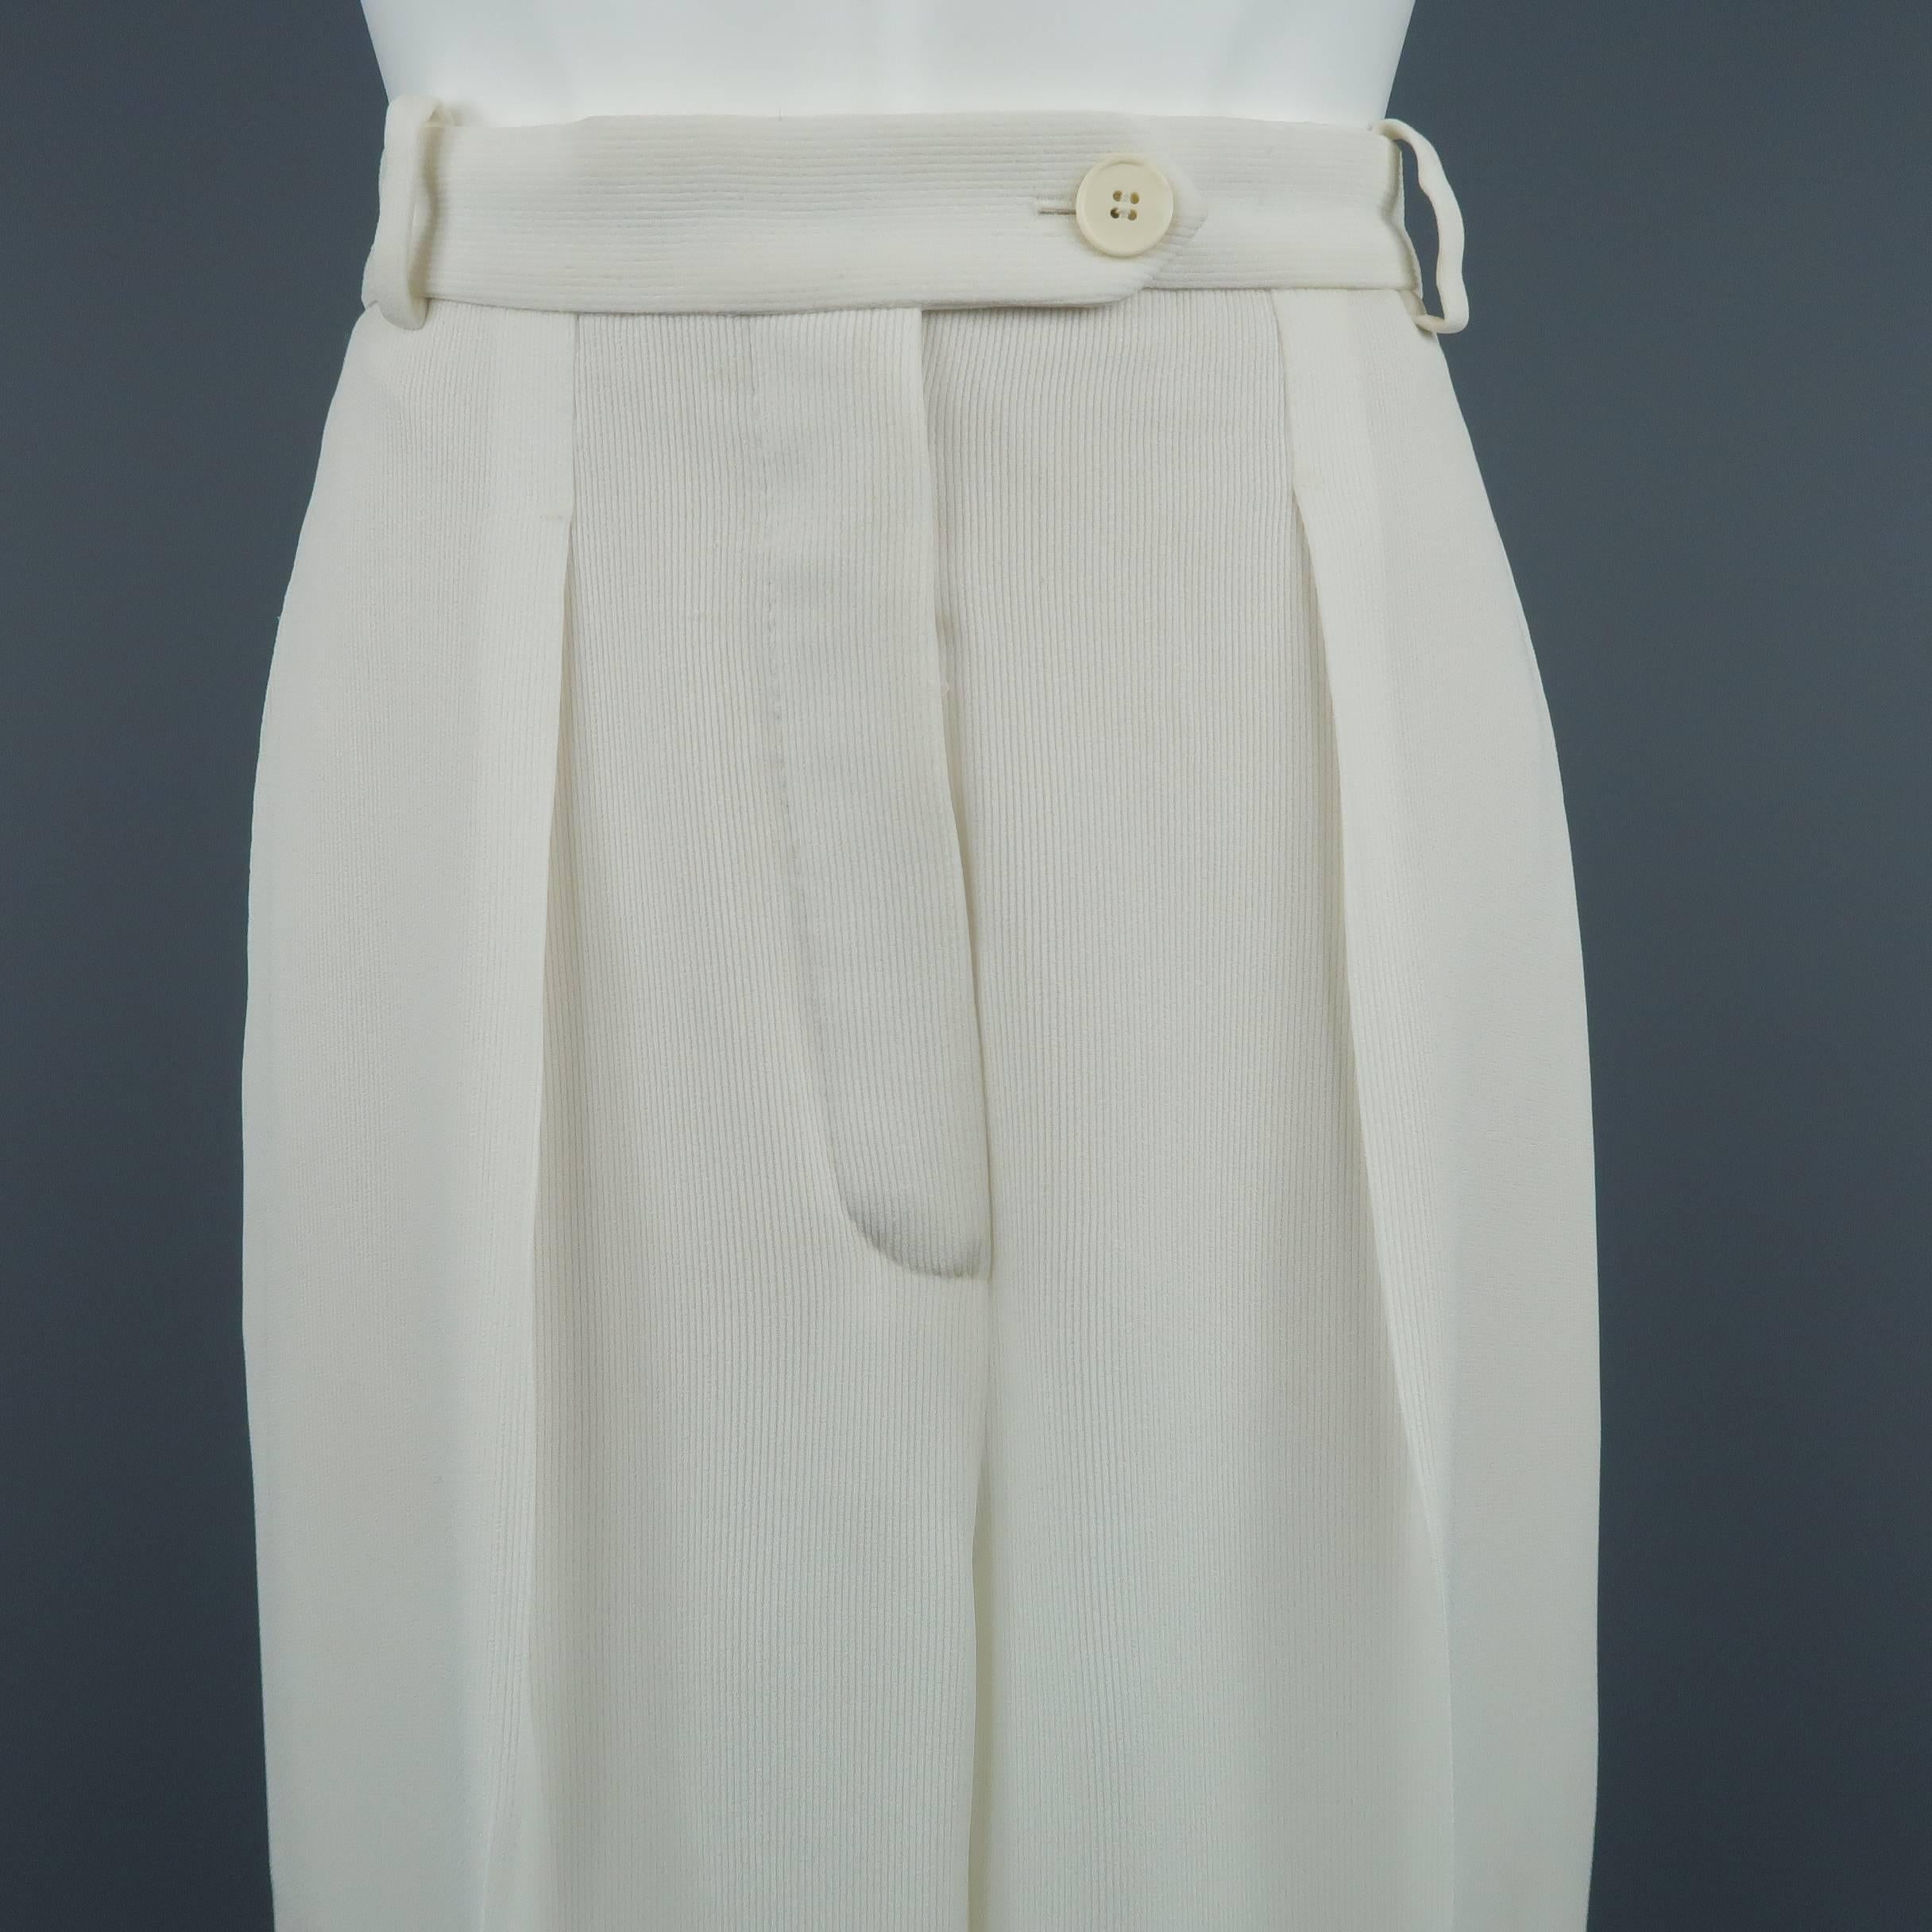 Vintage HERMES trousers come in a ribbed textured semi sheer cream viscose with a high rise, single pleat front, and relaxed wide leg fit. Fully lined. Minor wear throughout. As-is. Made in France.
 
Good Pre-Owned Condition.
Marked: FR 40
